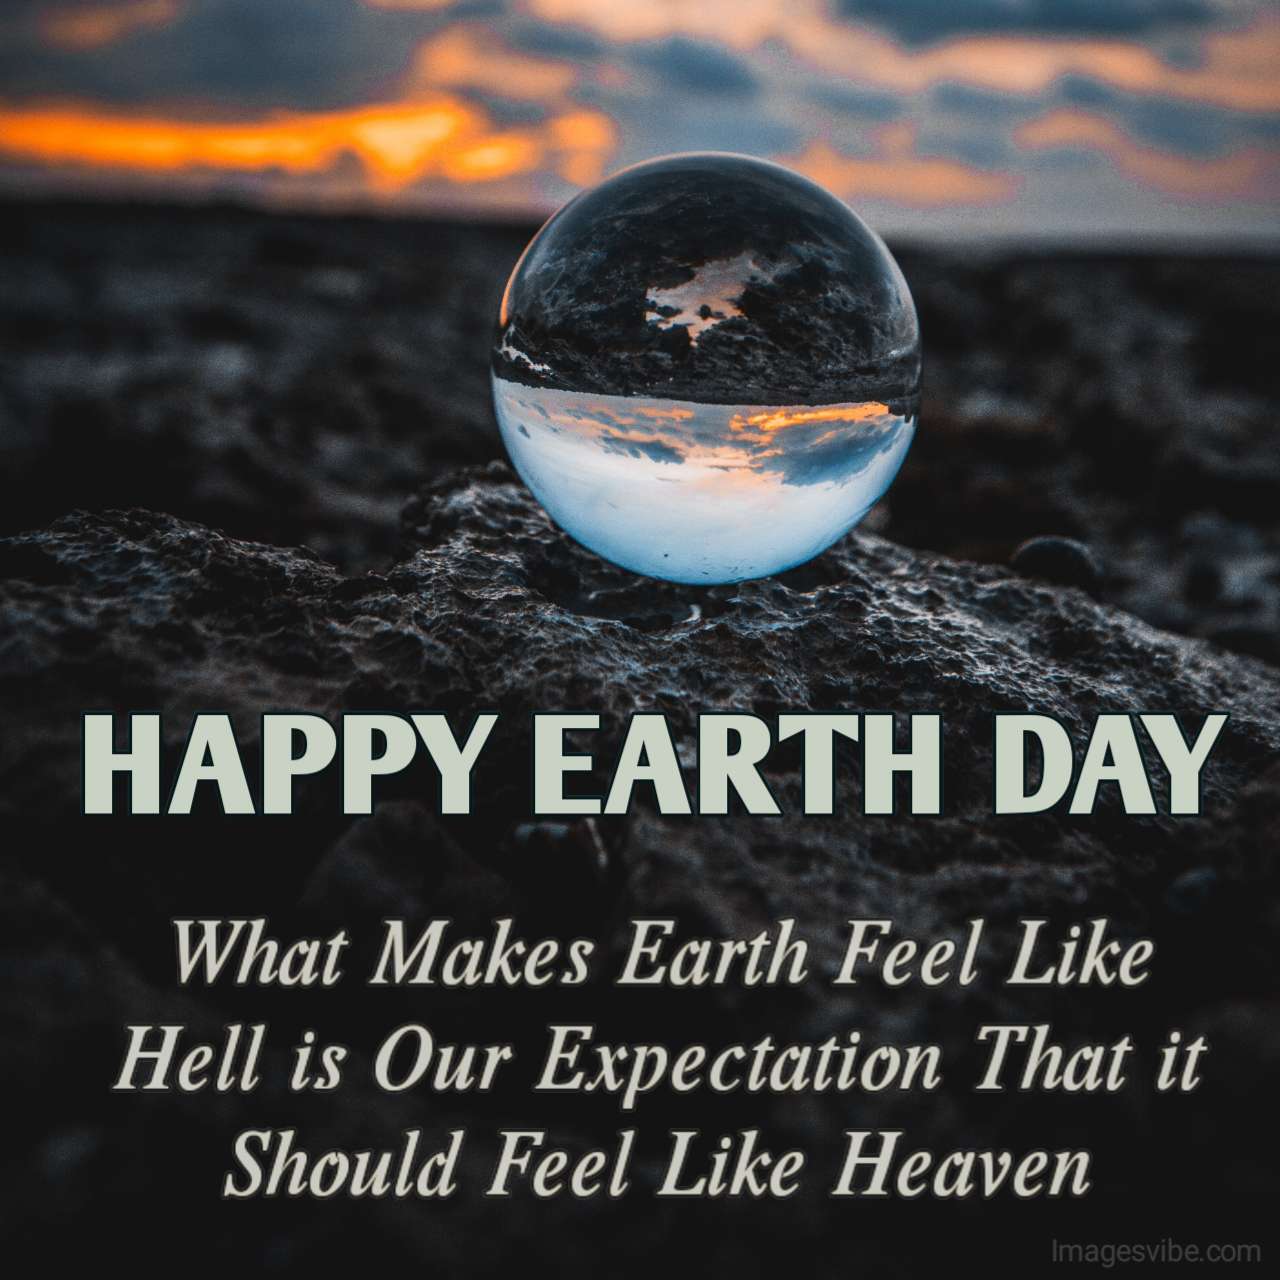 Happy Earth Day 2023 Wishes Image & Quotes Messages